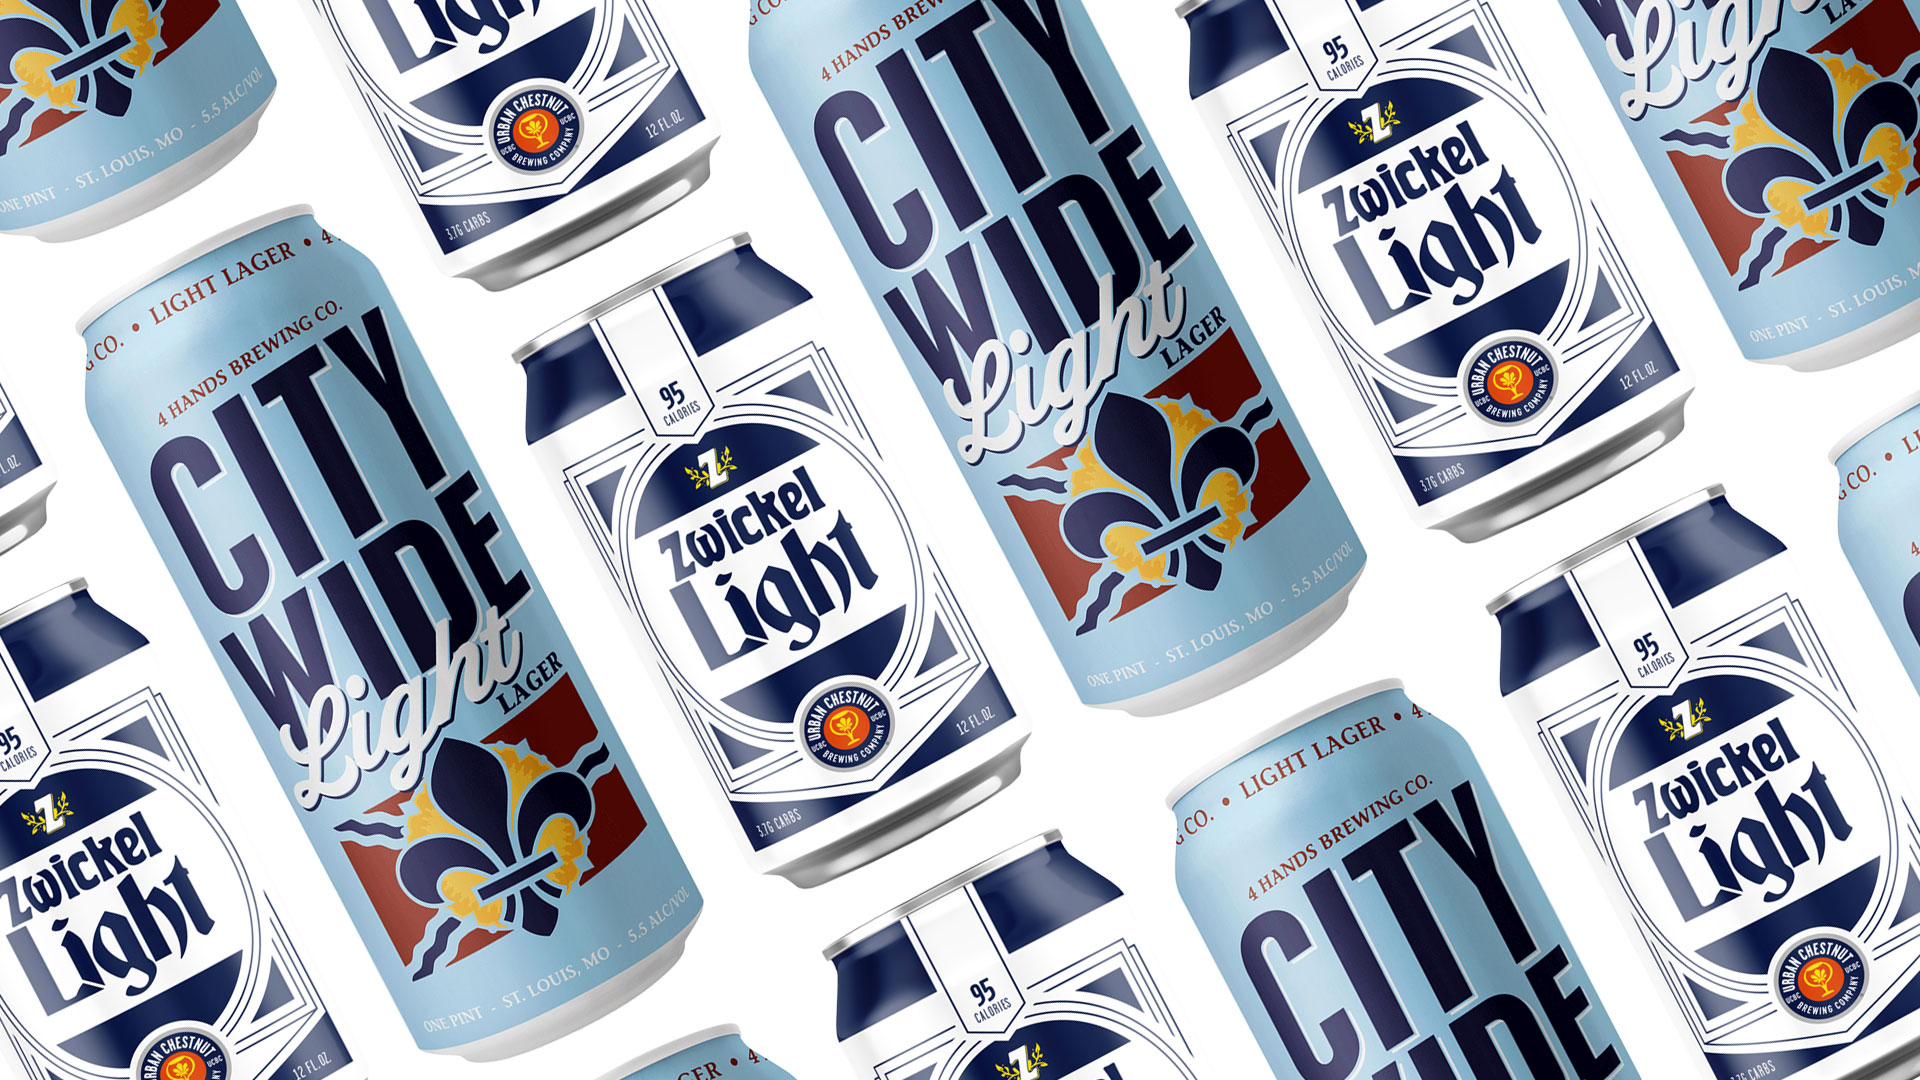 City Wide Light Lager: St. Louis Craft Beer Goes Refreshing